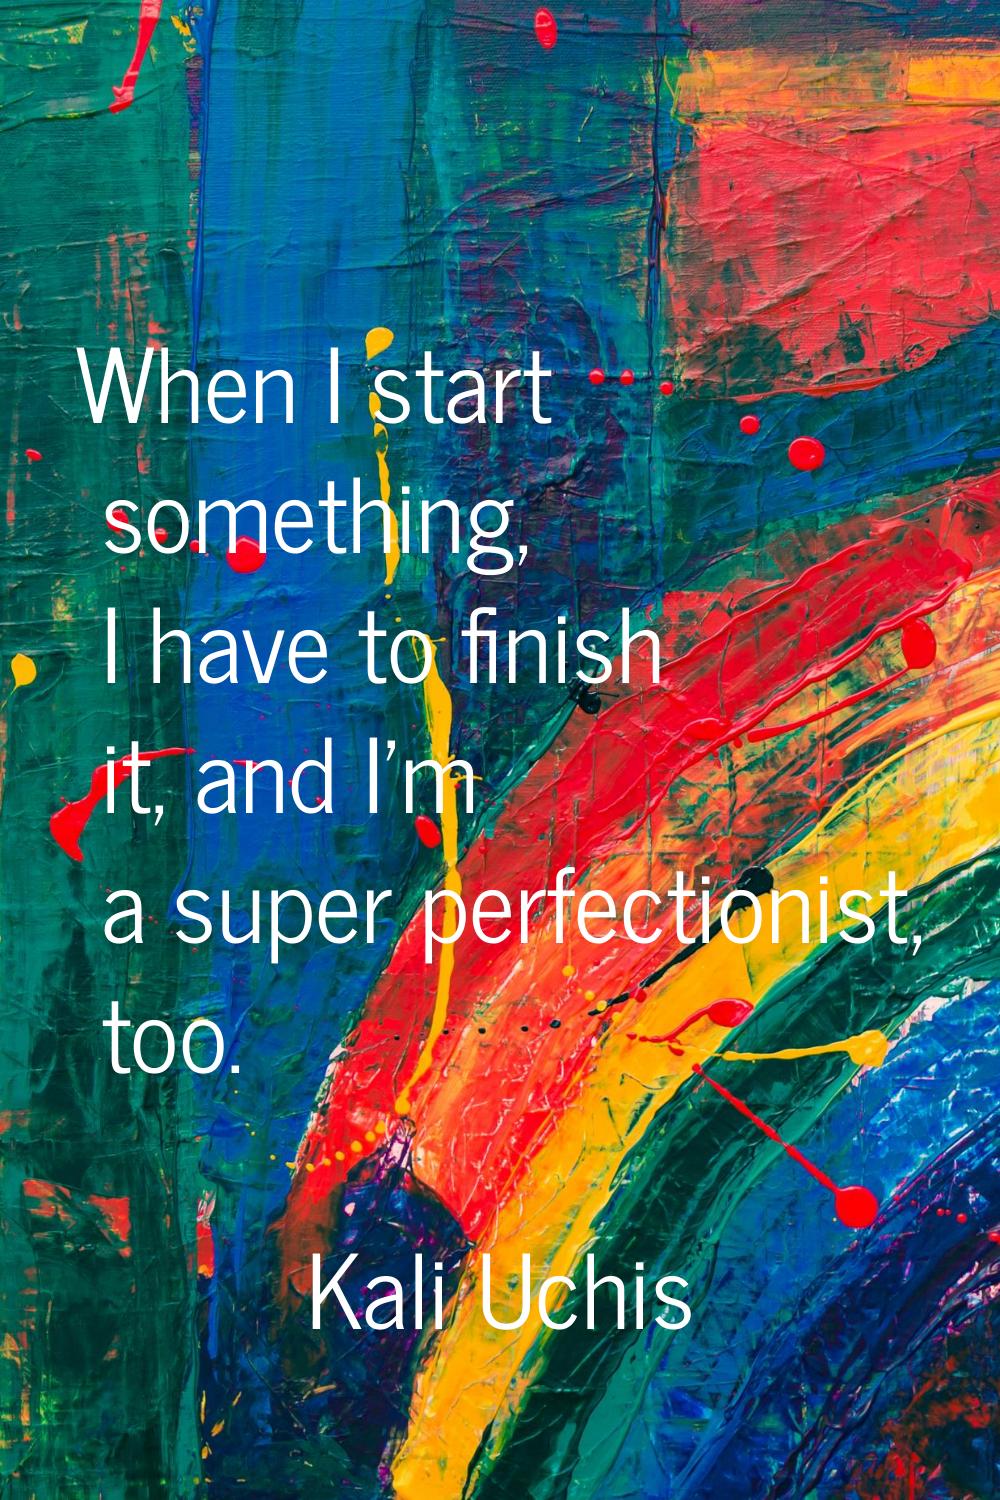 When I start something, I have to finish it, and I'm a super perfectionist, too.